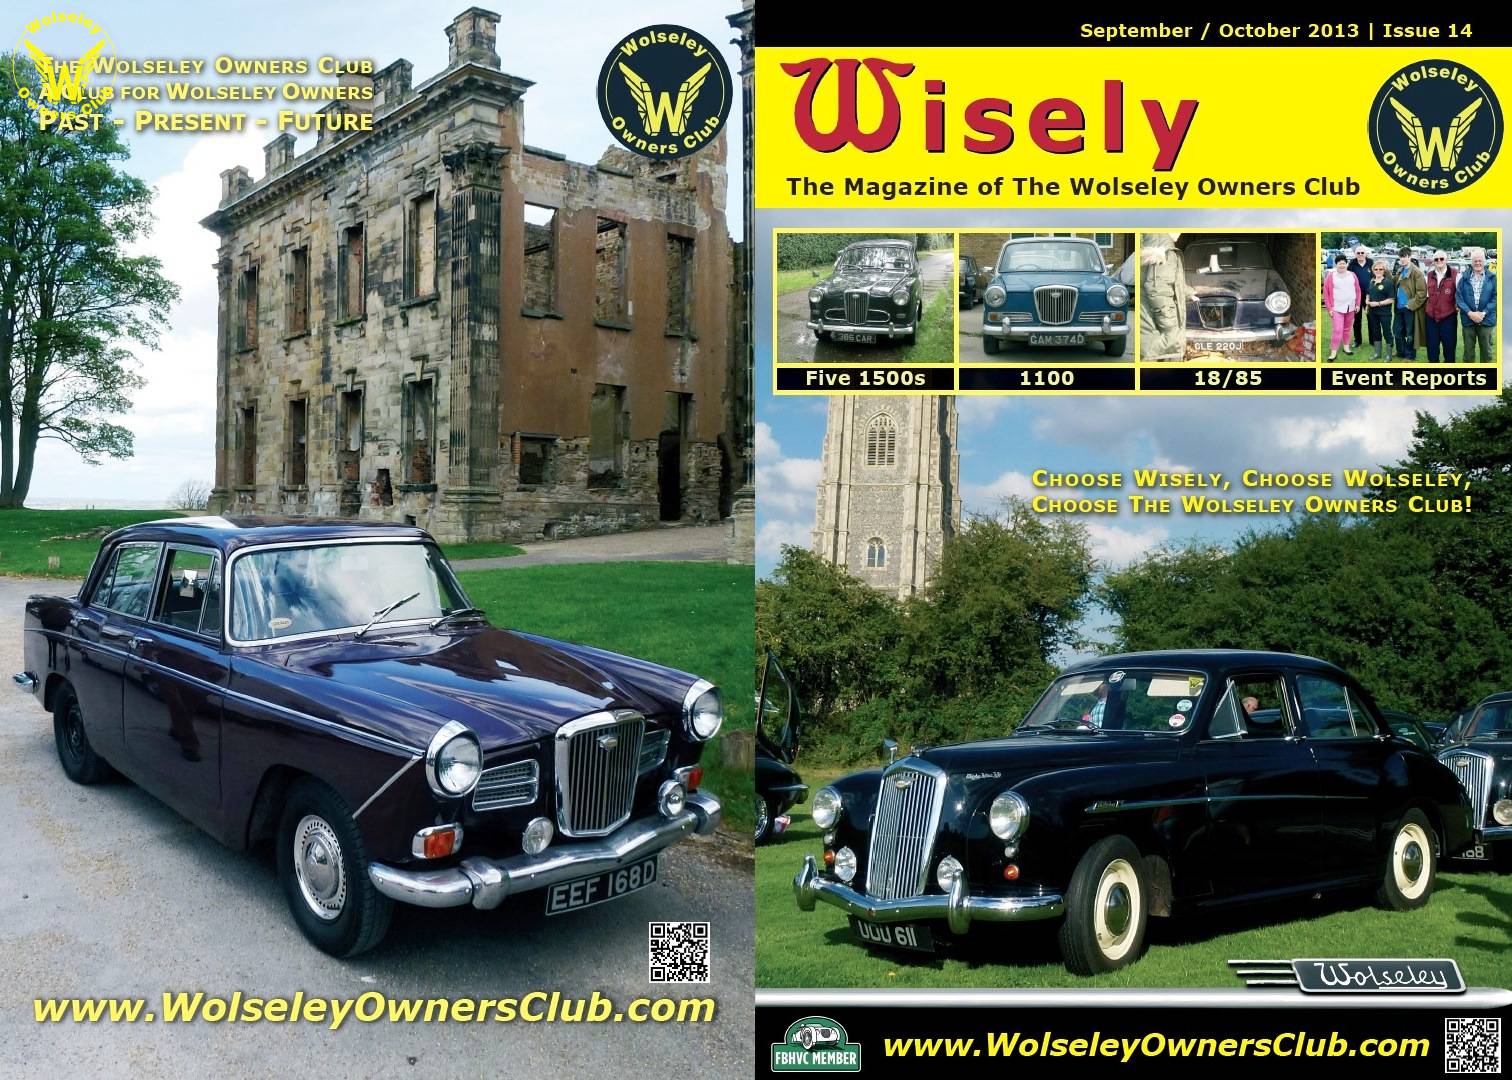 Wisely Issue 14